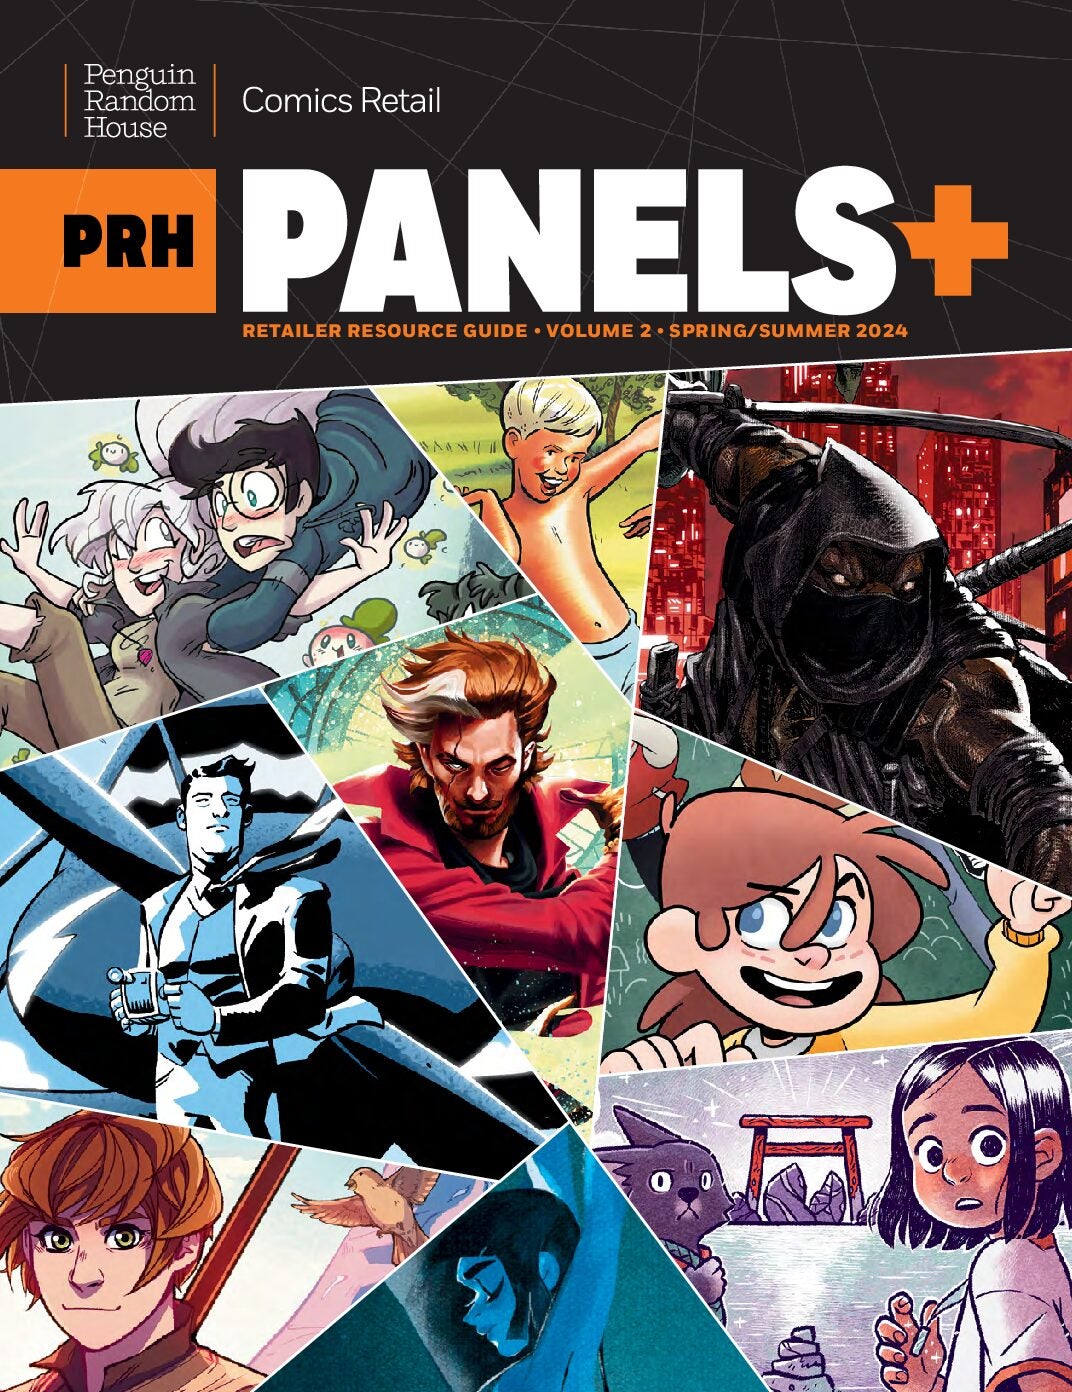 PRH Panels+ Spring/Summer 2024 Retailer Resource Guide cover